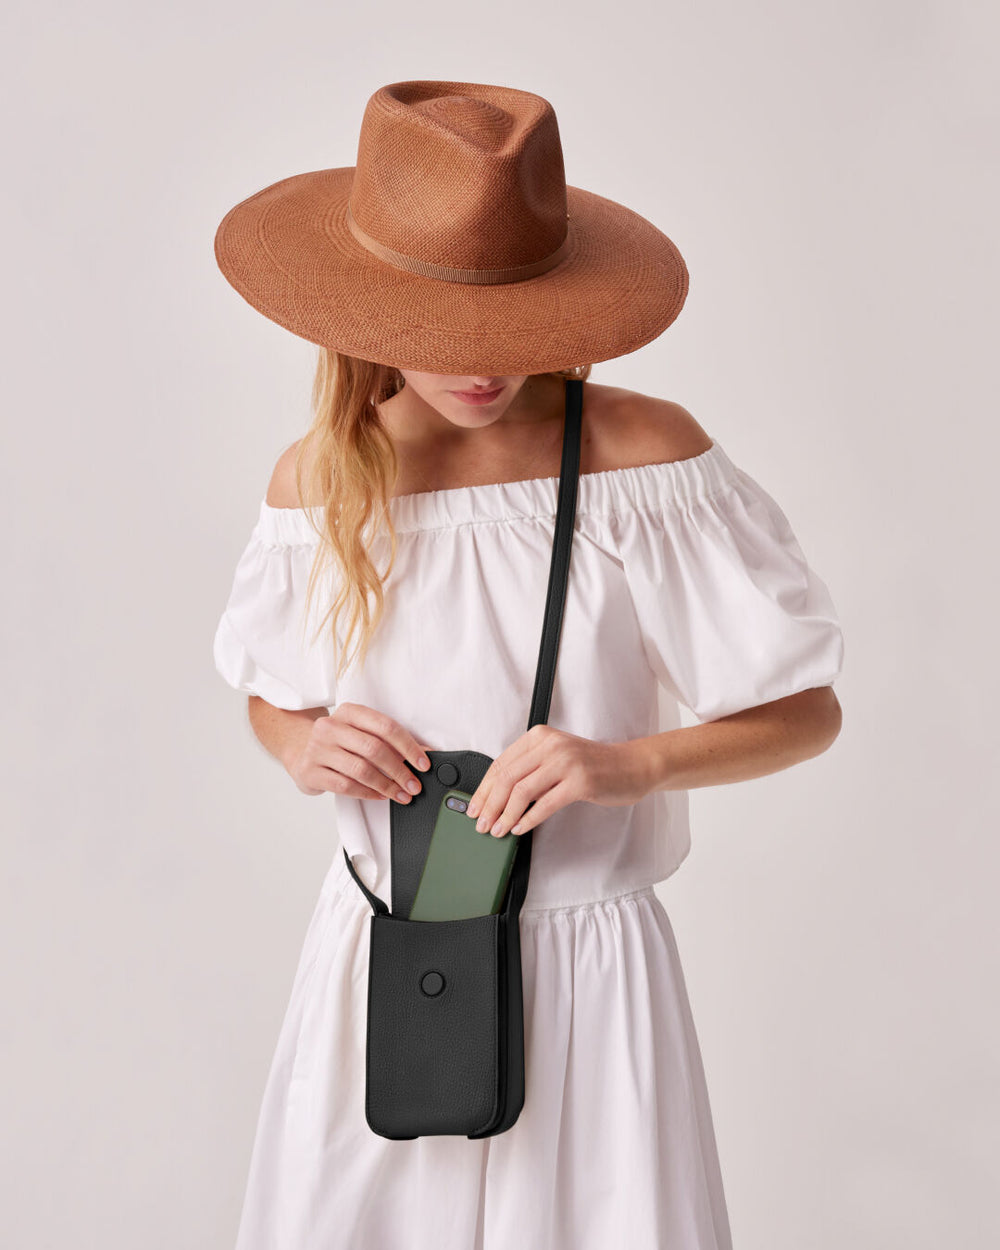 Woman in off-shoulder dress and wide-brimmed hat holding a purse.